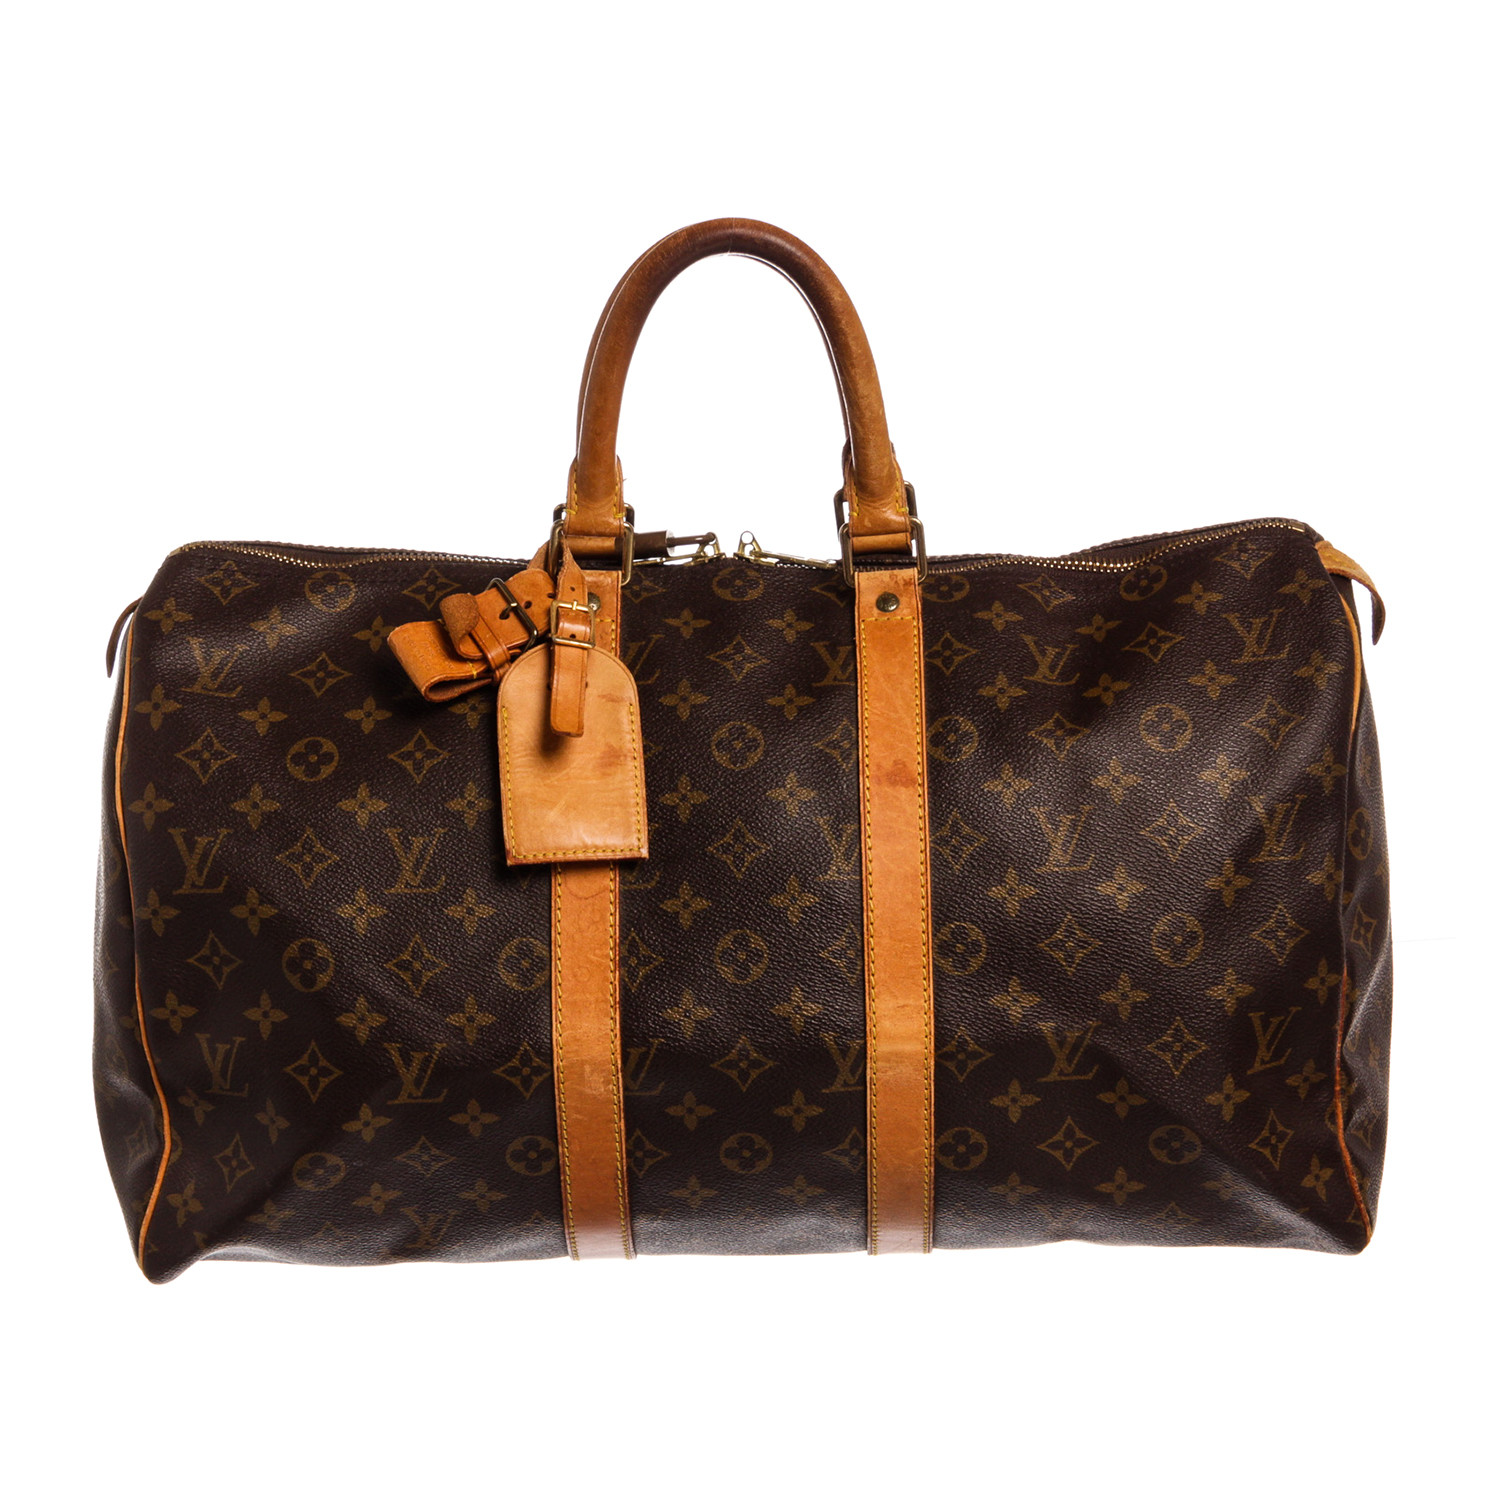 Discounted Base Shapers for LV Keepall Size 60 Bags Sturdy 